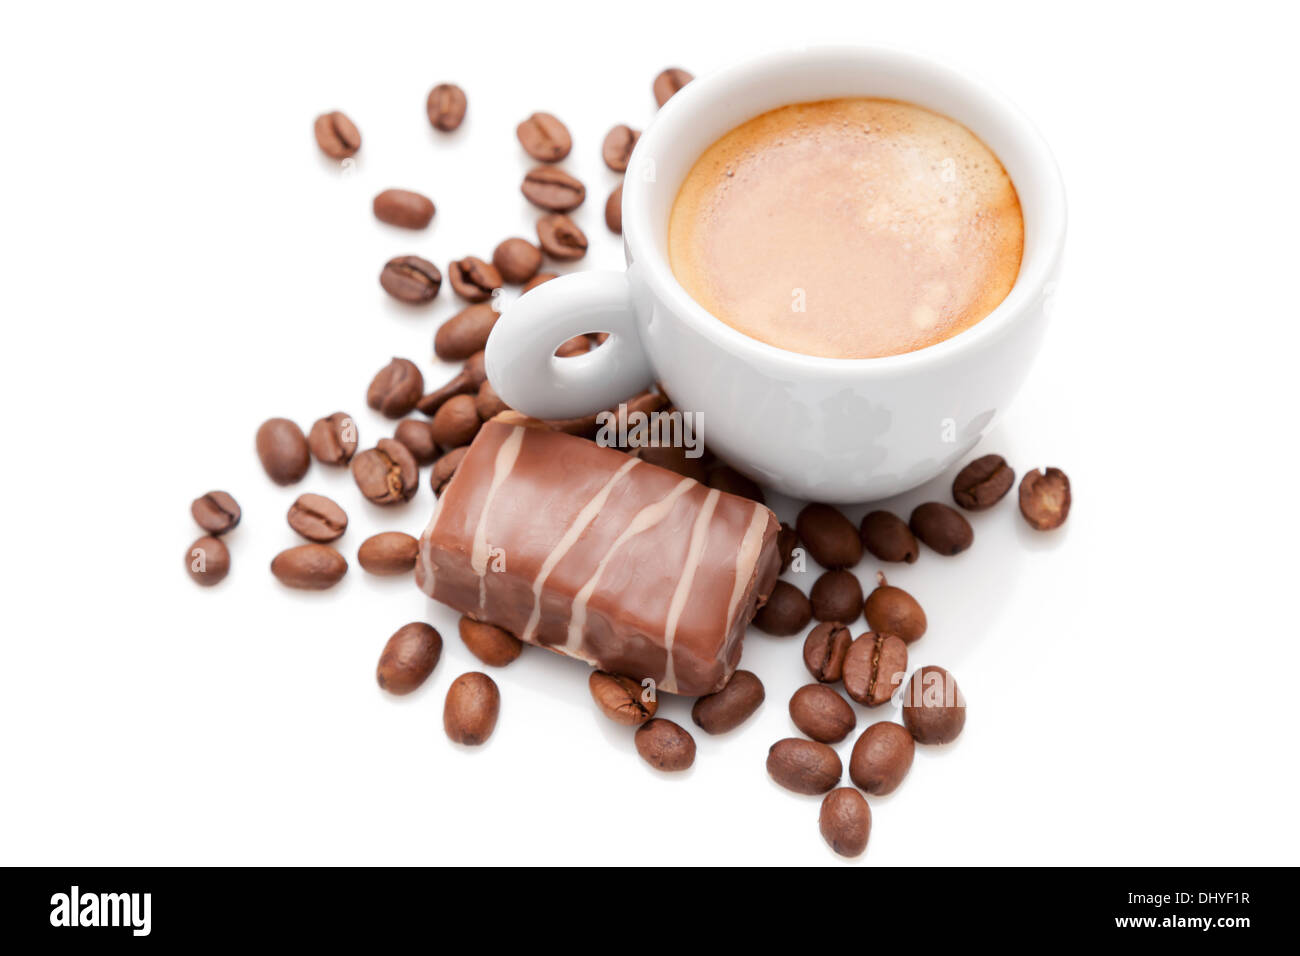 Small espresso cup with chocolate and coffee beans isolated on white Stock Photo